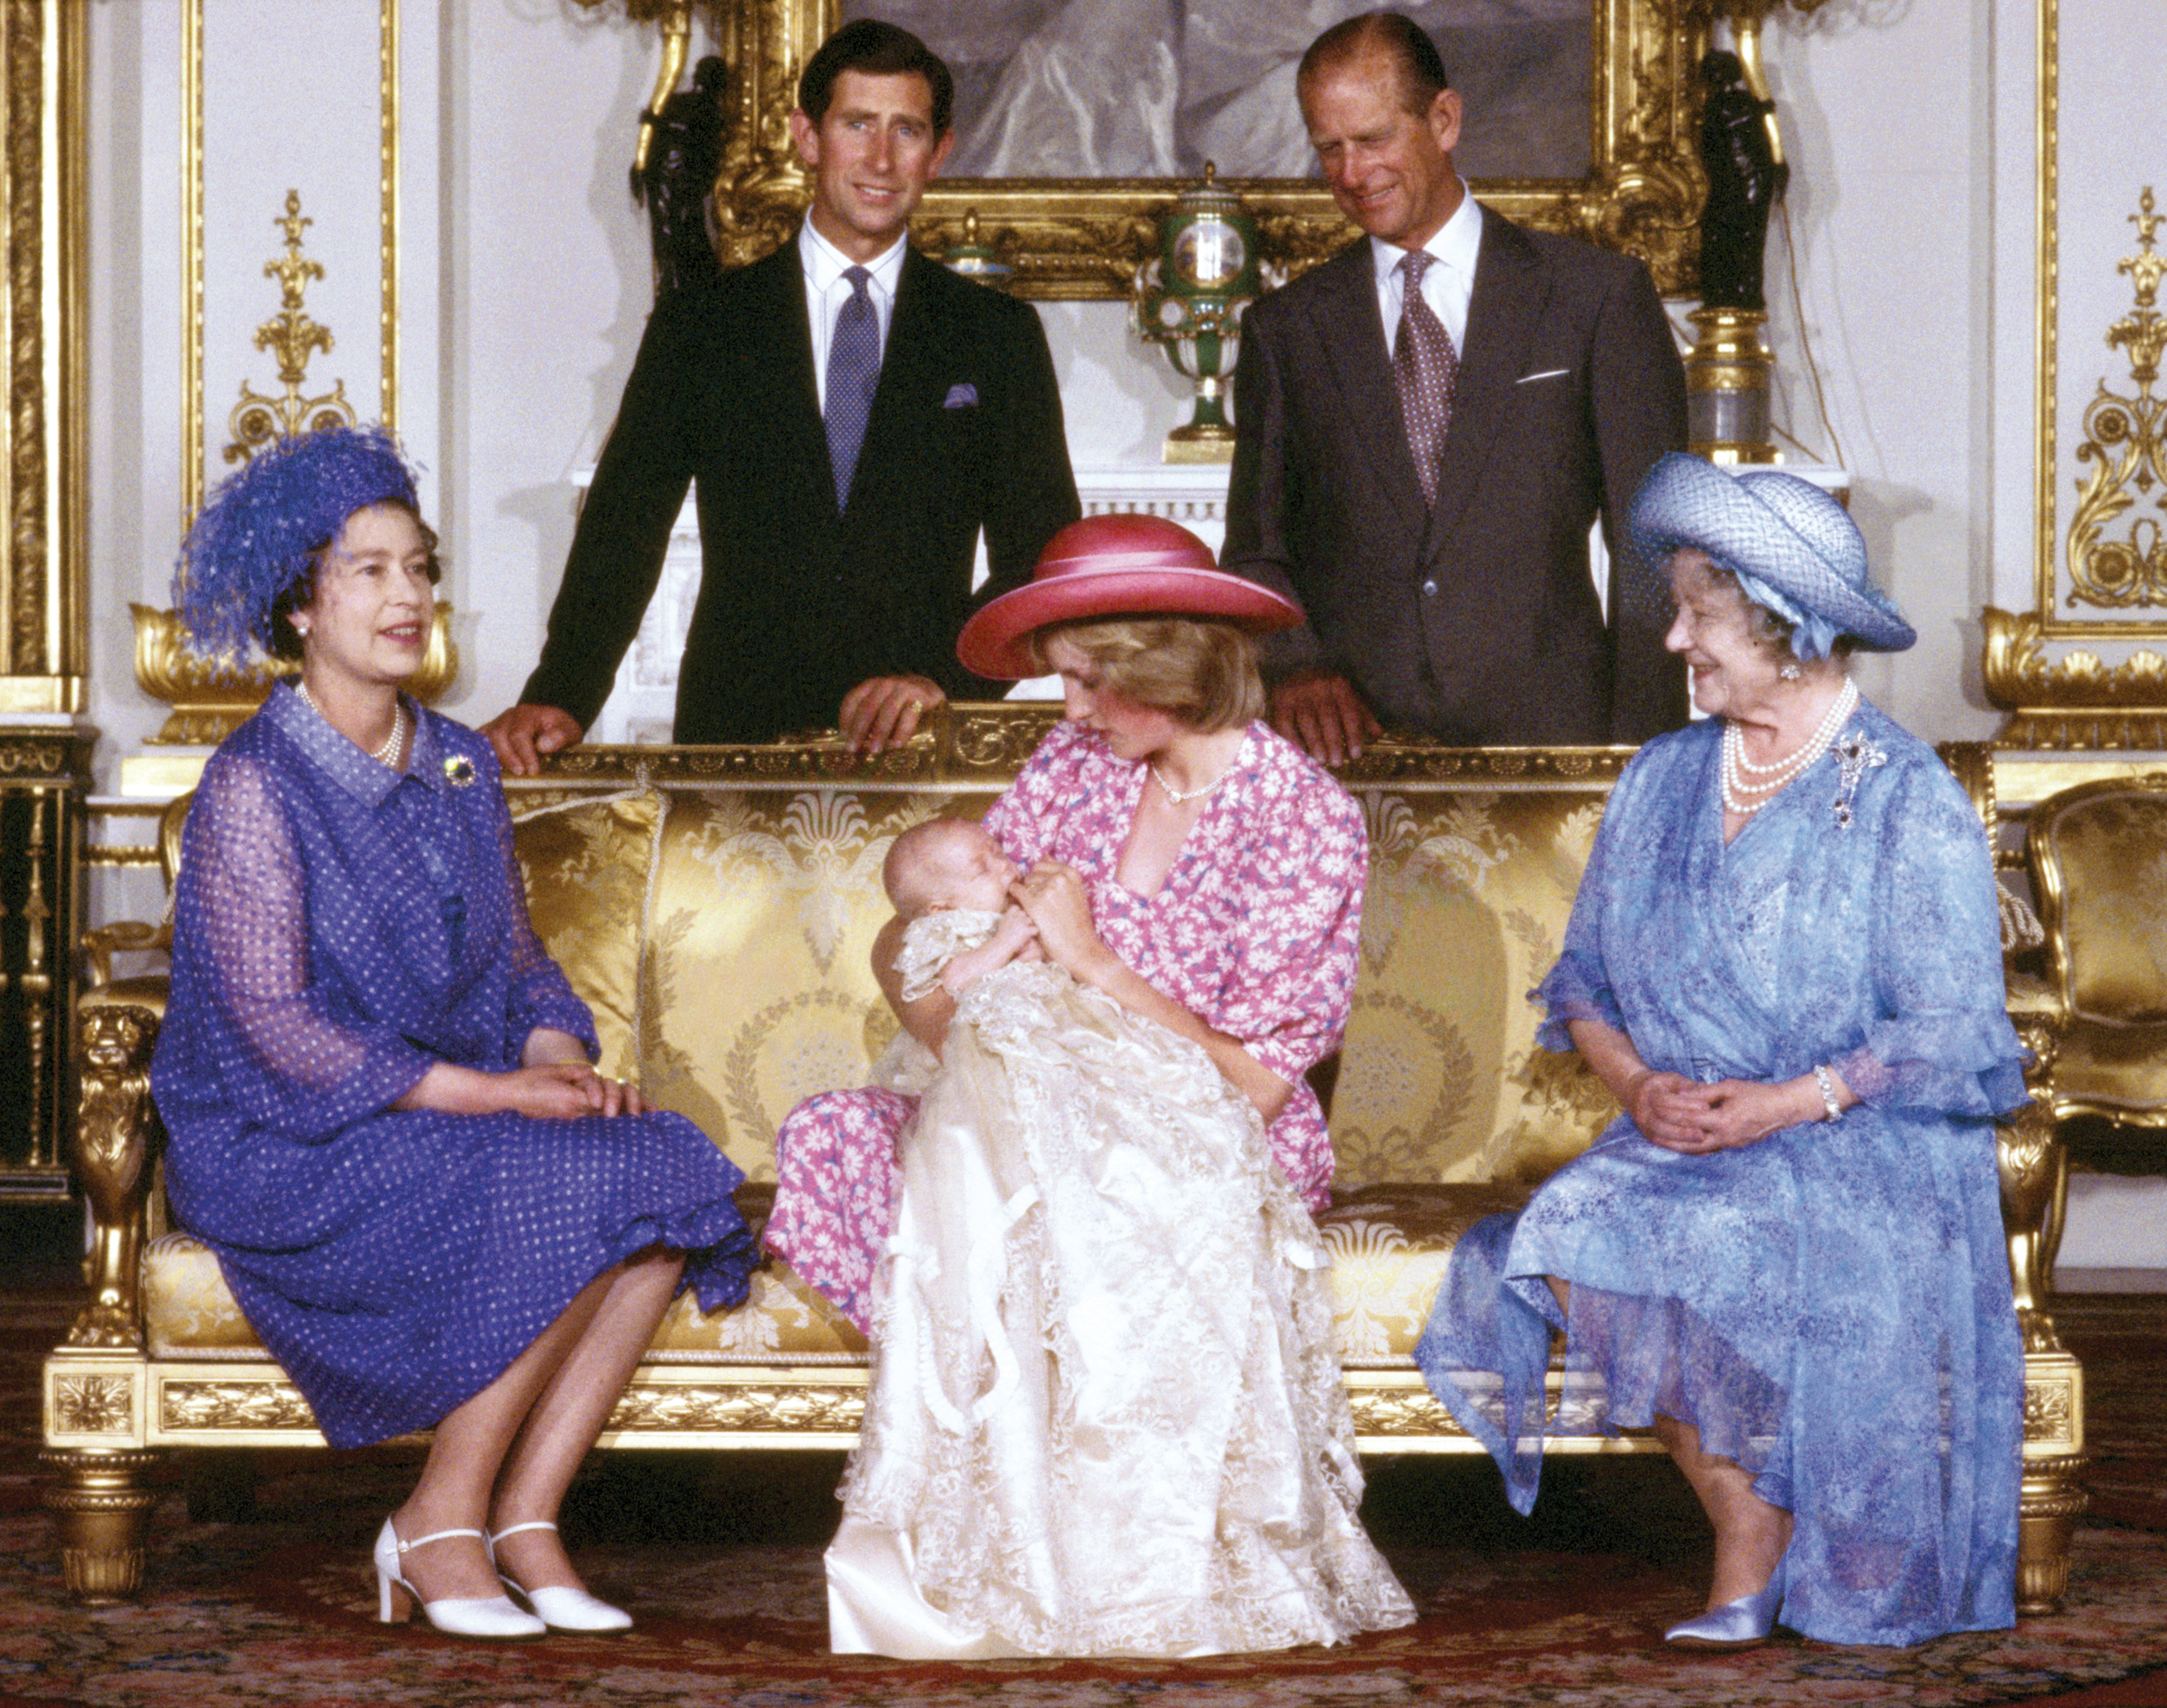 The Royal family at Buckingham Palace, London, on the day of Prince William's christening